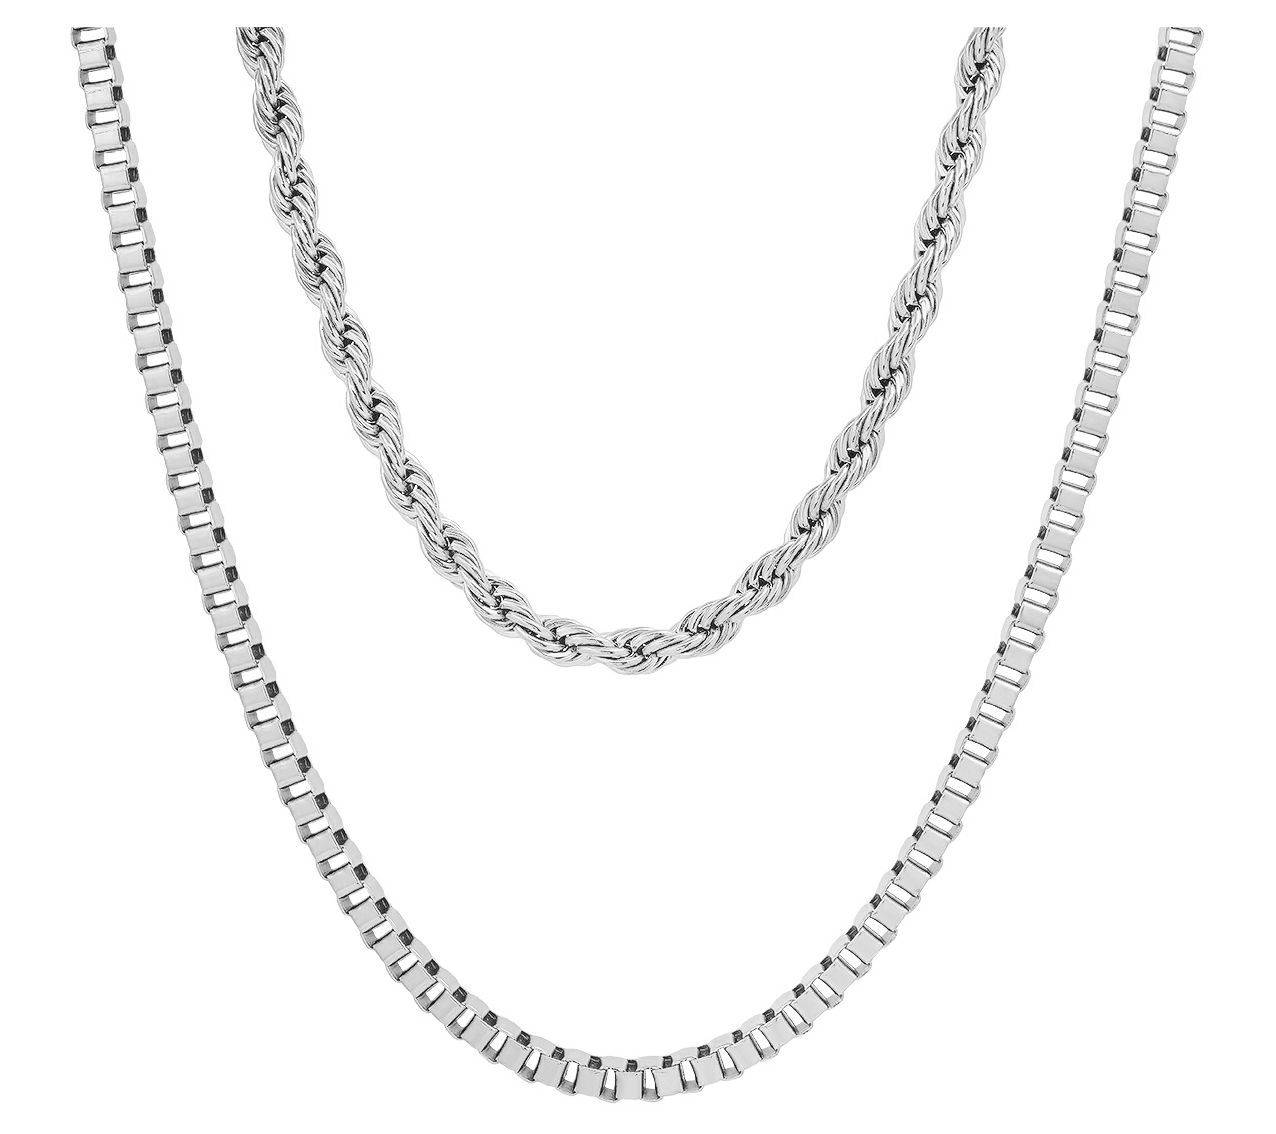 Steel by Design Men's Double Box & Rope Chain Necklace 